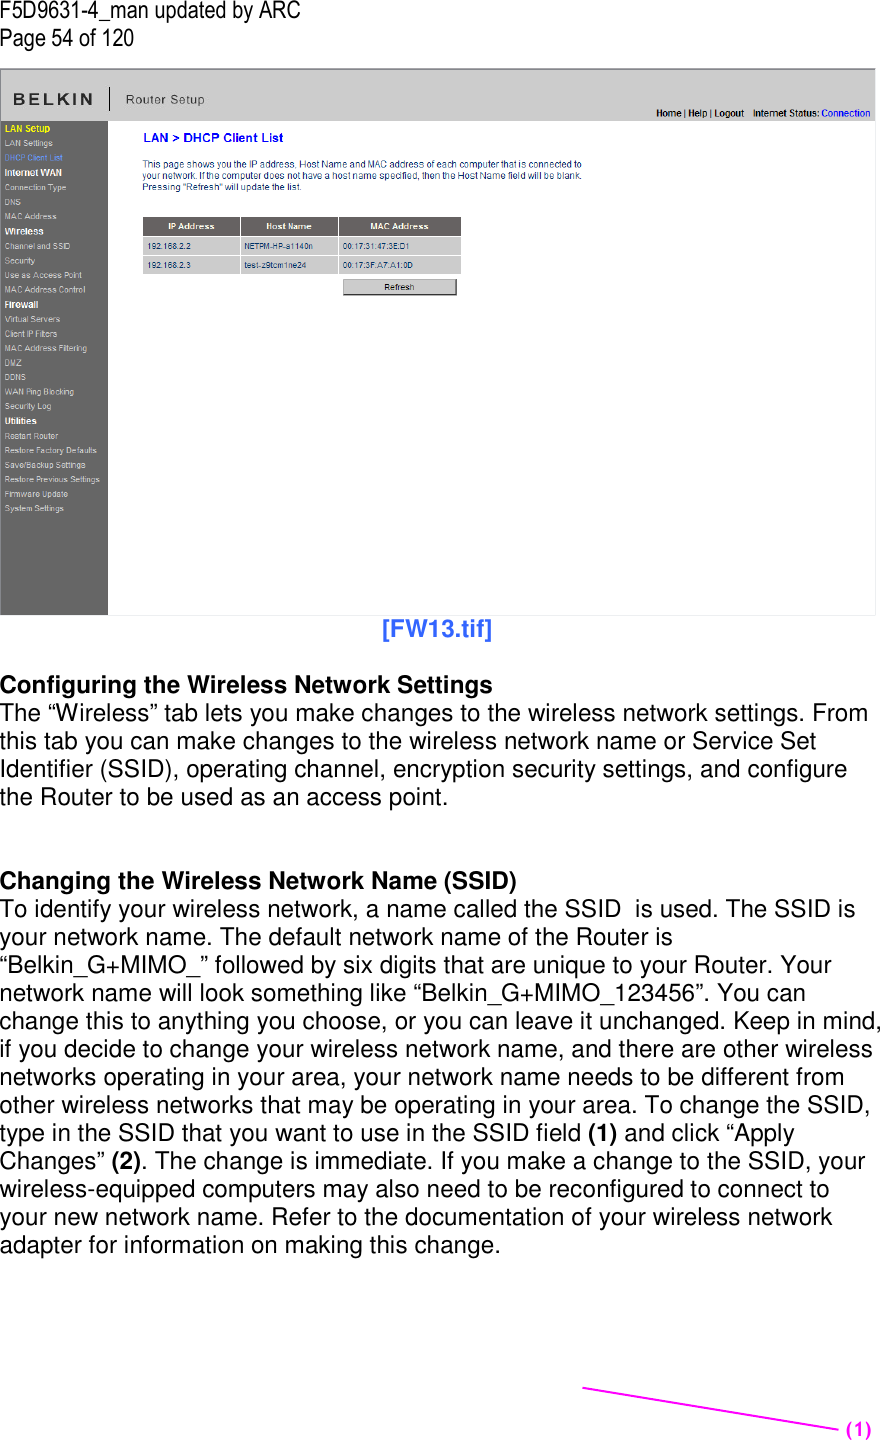 F5D9631-4_man updated by ARC Page 54 of 120  [FW13.tif]  Configuring the Wireless Network Settings The “Wireless” tab lets you make changes to the wireless network settings. From this tab you can make changes to the wireless network name or Service Set Identifier (SSID), operating channel, encryption security settings, and configure the Router to be used as an access point.   Changing the Wireless Network Name (SSID) To identify your wireless network, a name called the SSID  is used. The SSID is your network name. The default network name of the Router is “Belkin_G+MIMO_” followed by six digits that are unique to your Router. Your network name will look something like “Belkin_G+MIMO_123456”. You can change this to anything you choose, or you can leave it unchanged. Keep in mind, if you decide to change your wireless network name, and there are other wireless networks operating in your area, your network name needs to be different from other wireless networks that may be operating in your area. To change the SSID, type in the SSID that you want to use in the SSID field (1) and click “Apply Changes” (2). The change is immediate. If you make a change to the SSID, your wireless-equipped computers may also need to be reconfigured to connect to your new network name. Refer to the documentation of your wireless network adapter for information on making this change.  (1)  